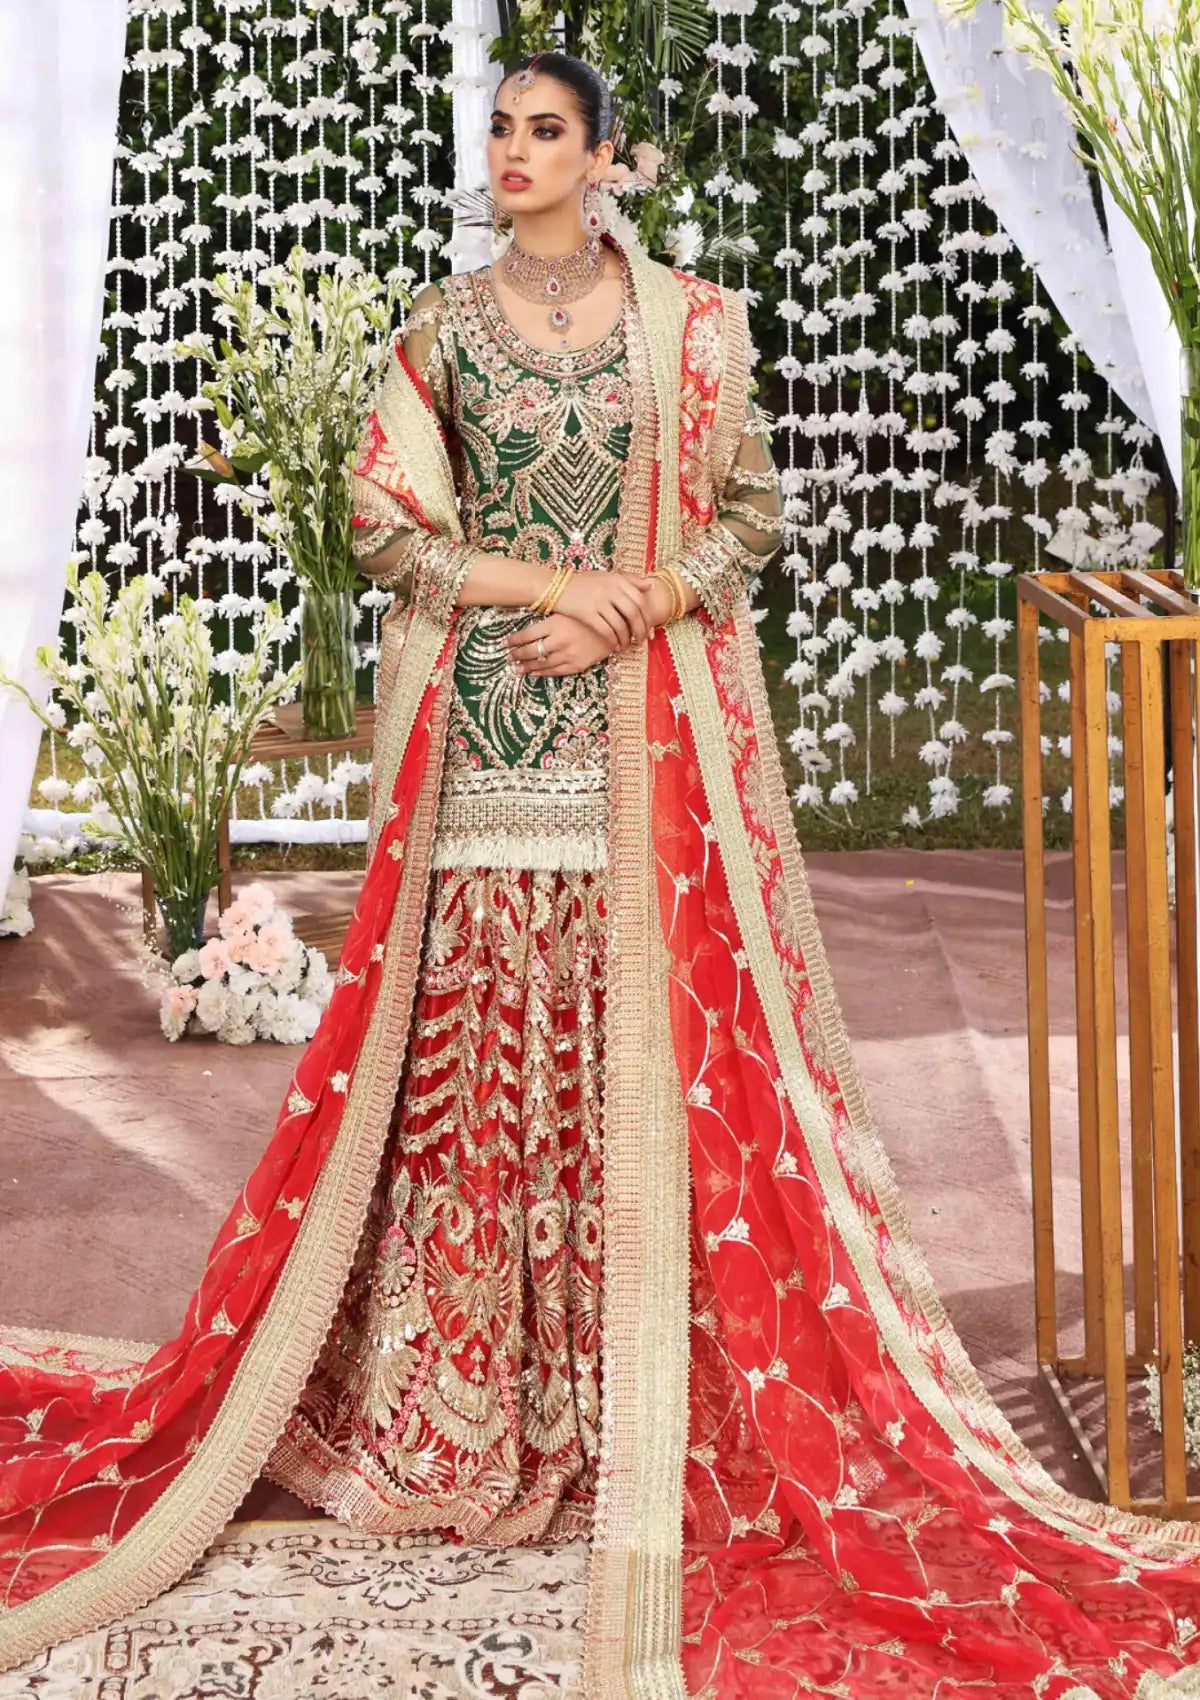 Maryum n Maria Brides'21 MBL-0008 is available at Mohsin Saeed Fabrics. ✓ shop all the top women clothing brands in pakistan ✓ Best Price and Offers ✓ Free Shipping ✓ Cash on Delivery ✓ formal & Wedding Collections 